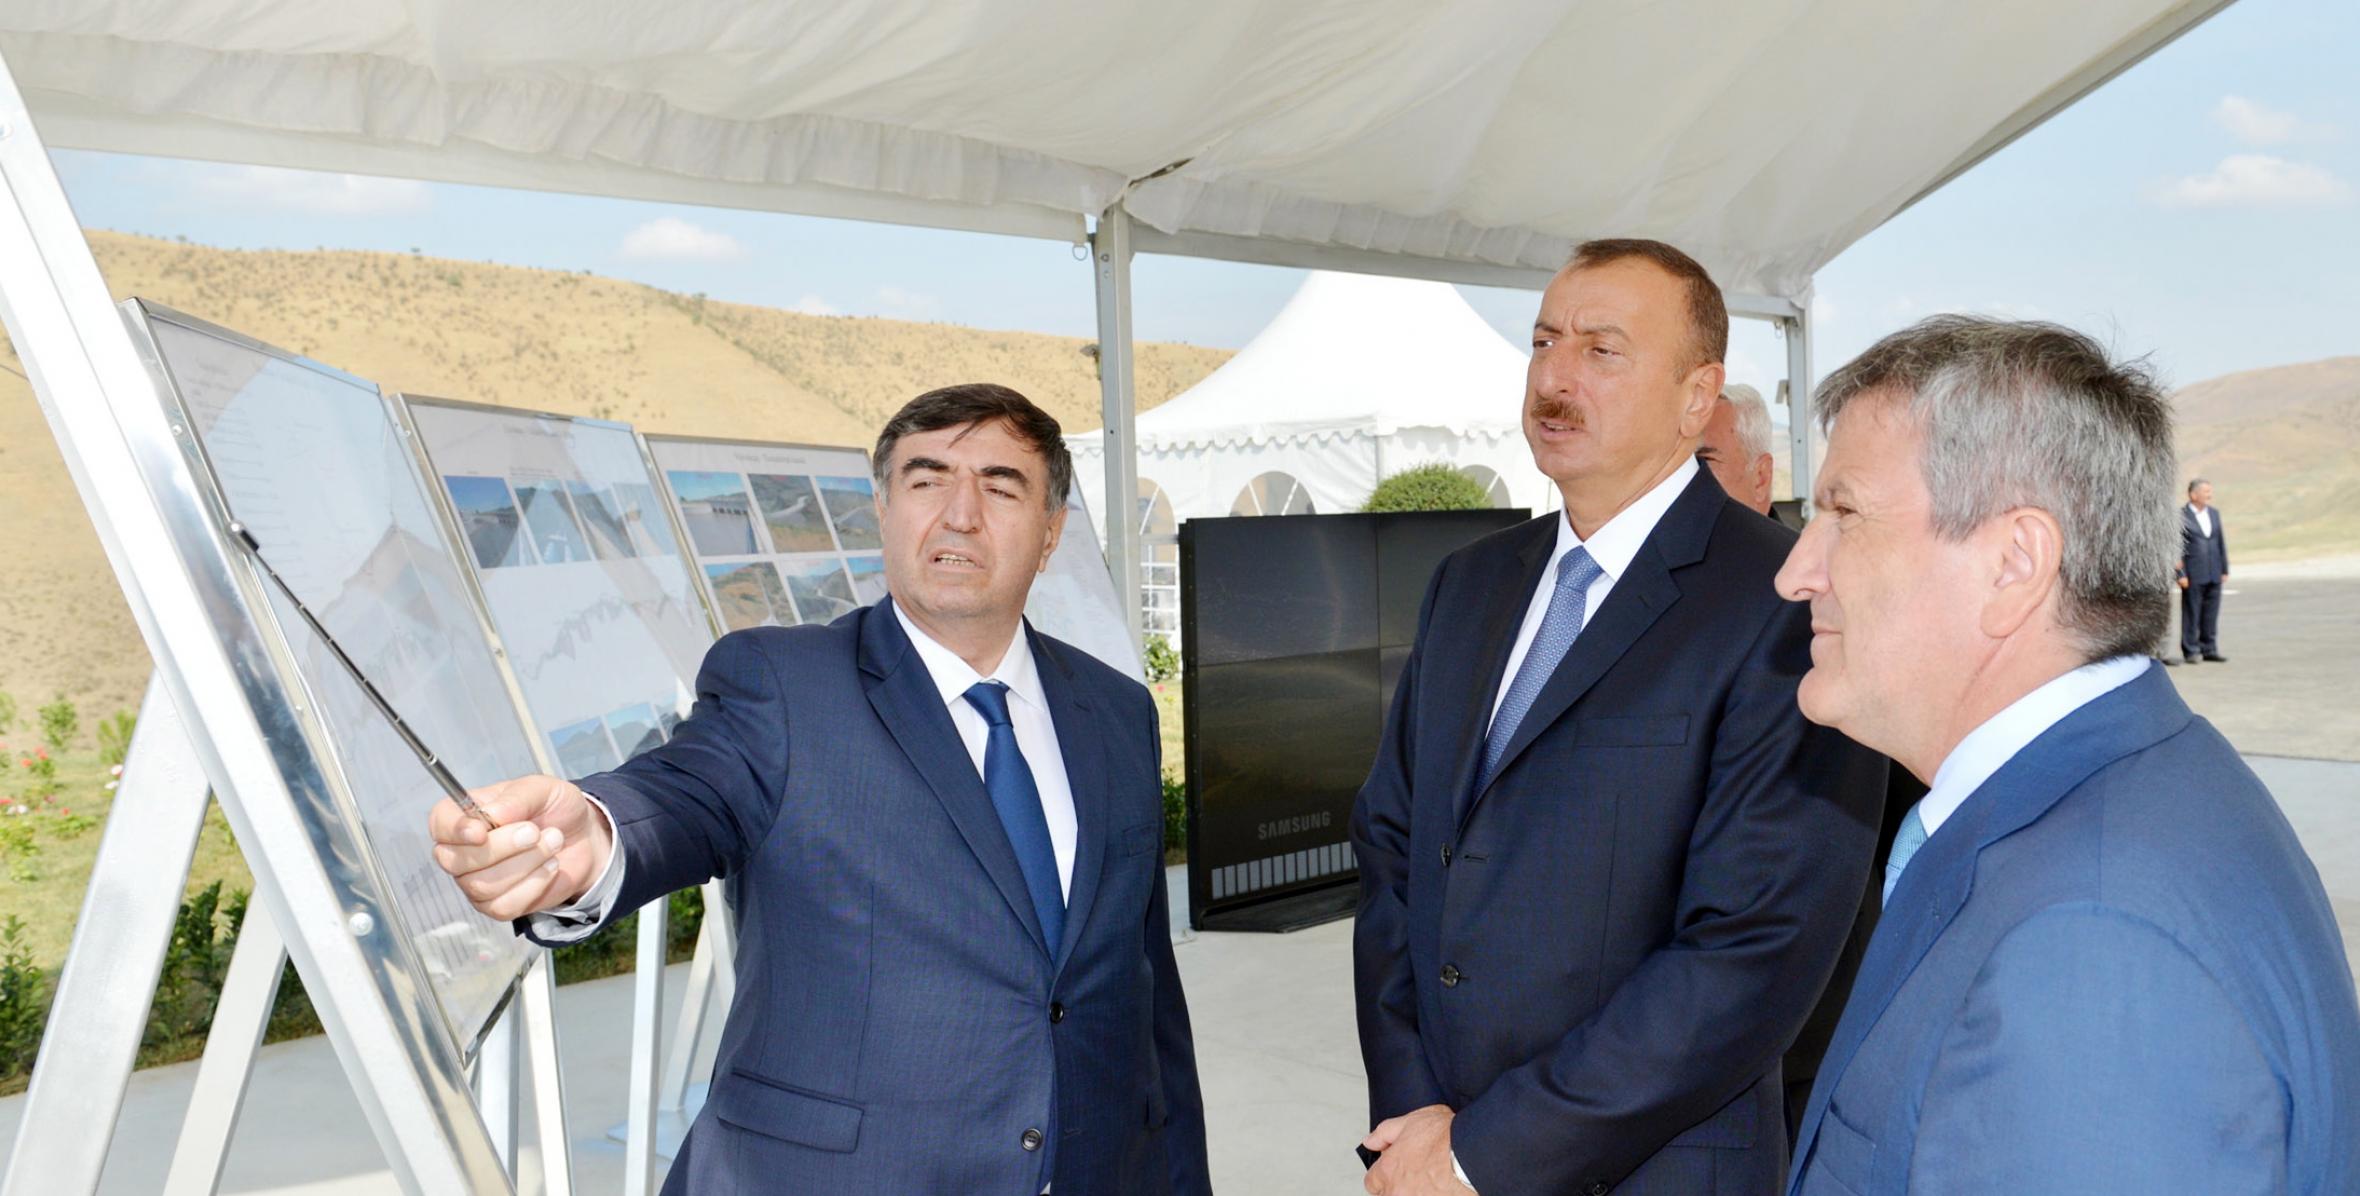 Ilham Aliyev attended a ceremony to commission the Valvalachay-Takhtakorpu canal and to start the filling of Takhtakorpu water reservoir with water